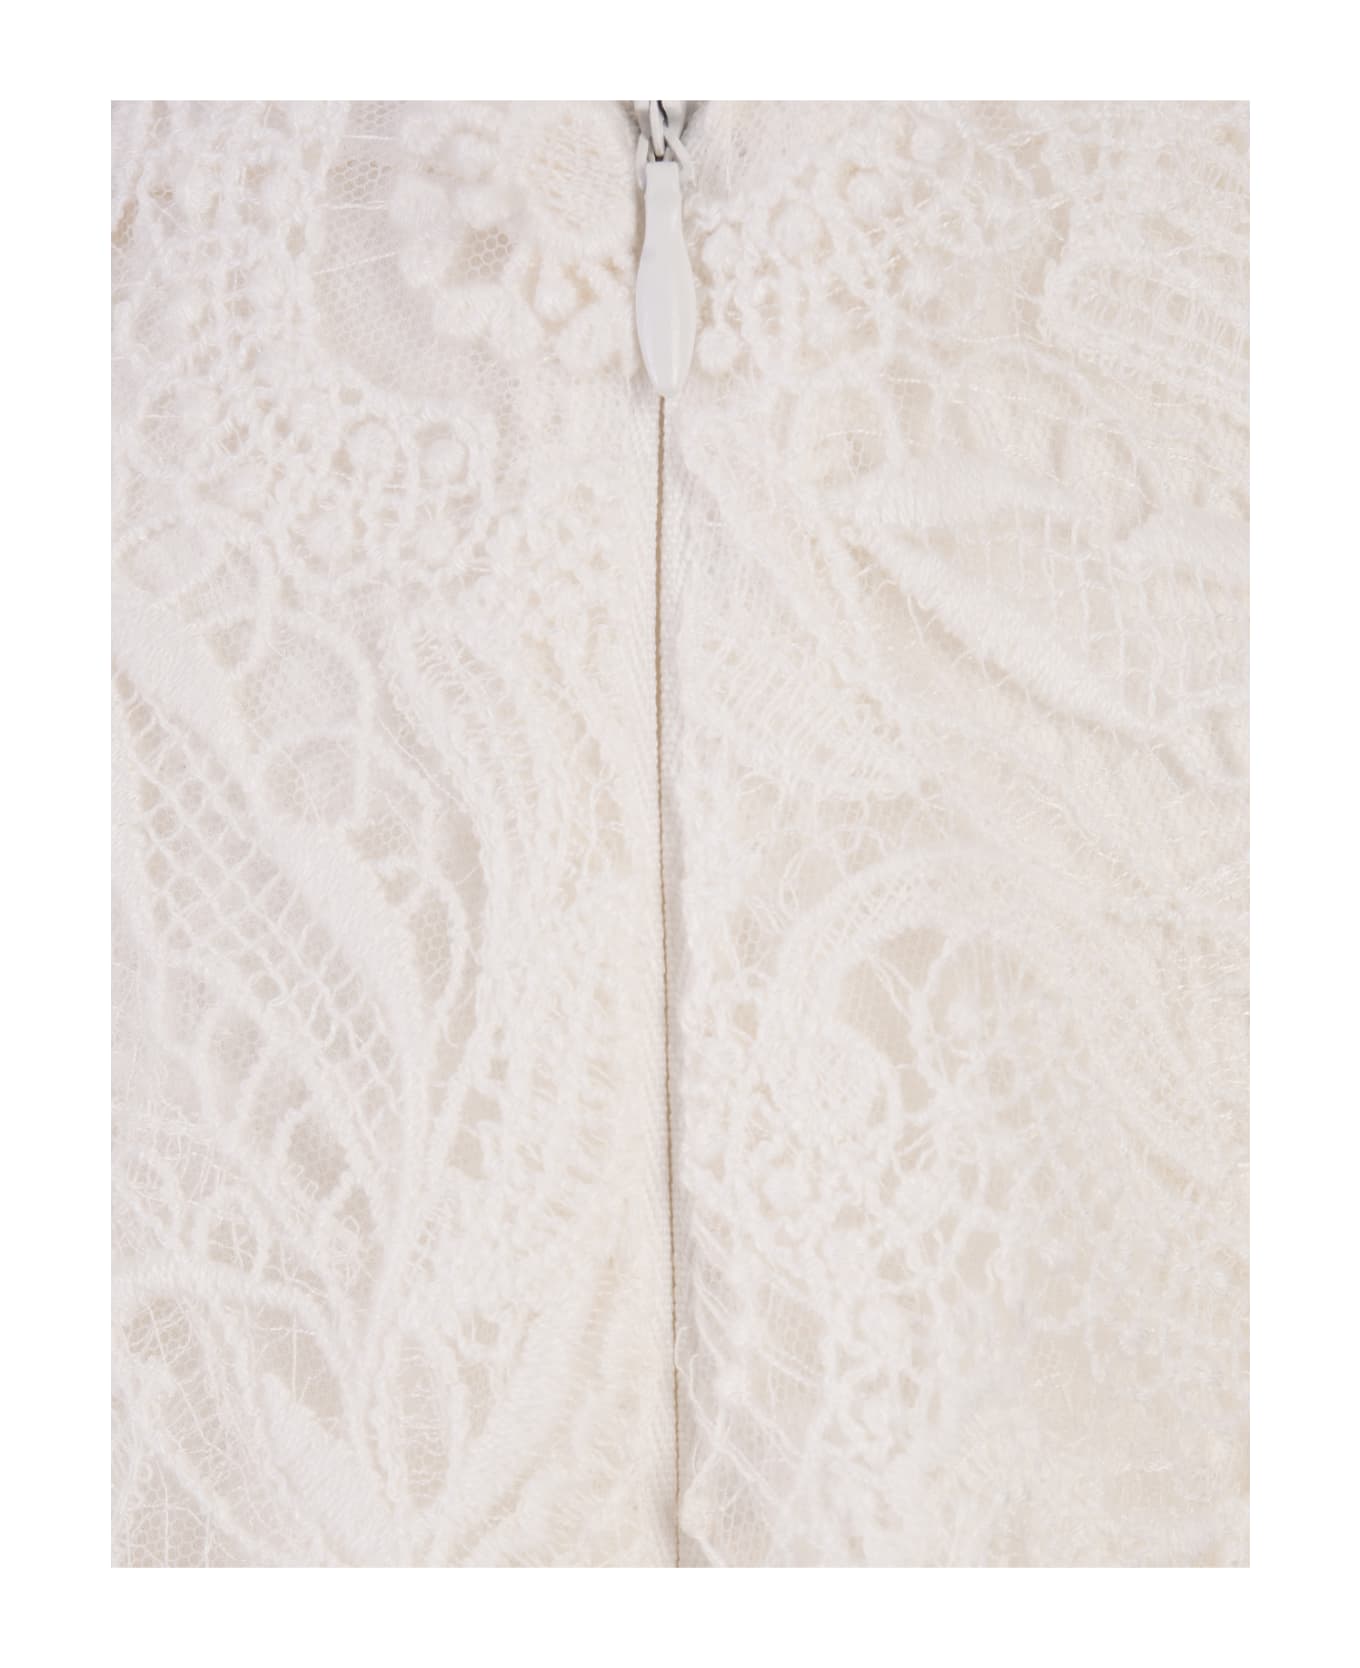 Ermanno Scervino Short A-line Skirt In White Lace - White スカート